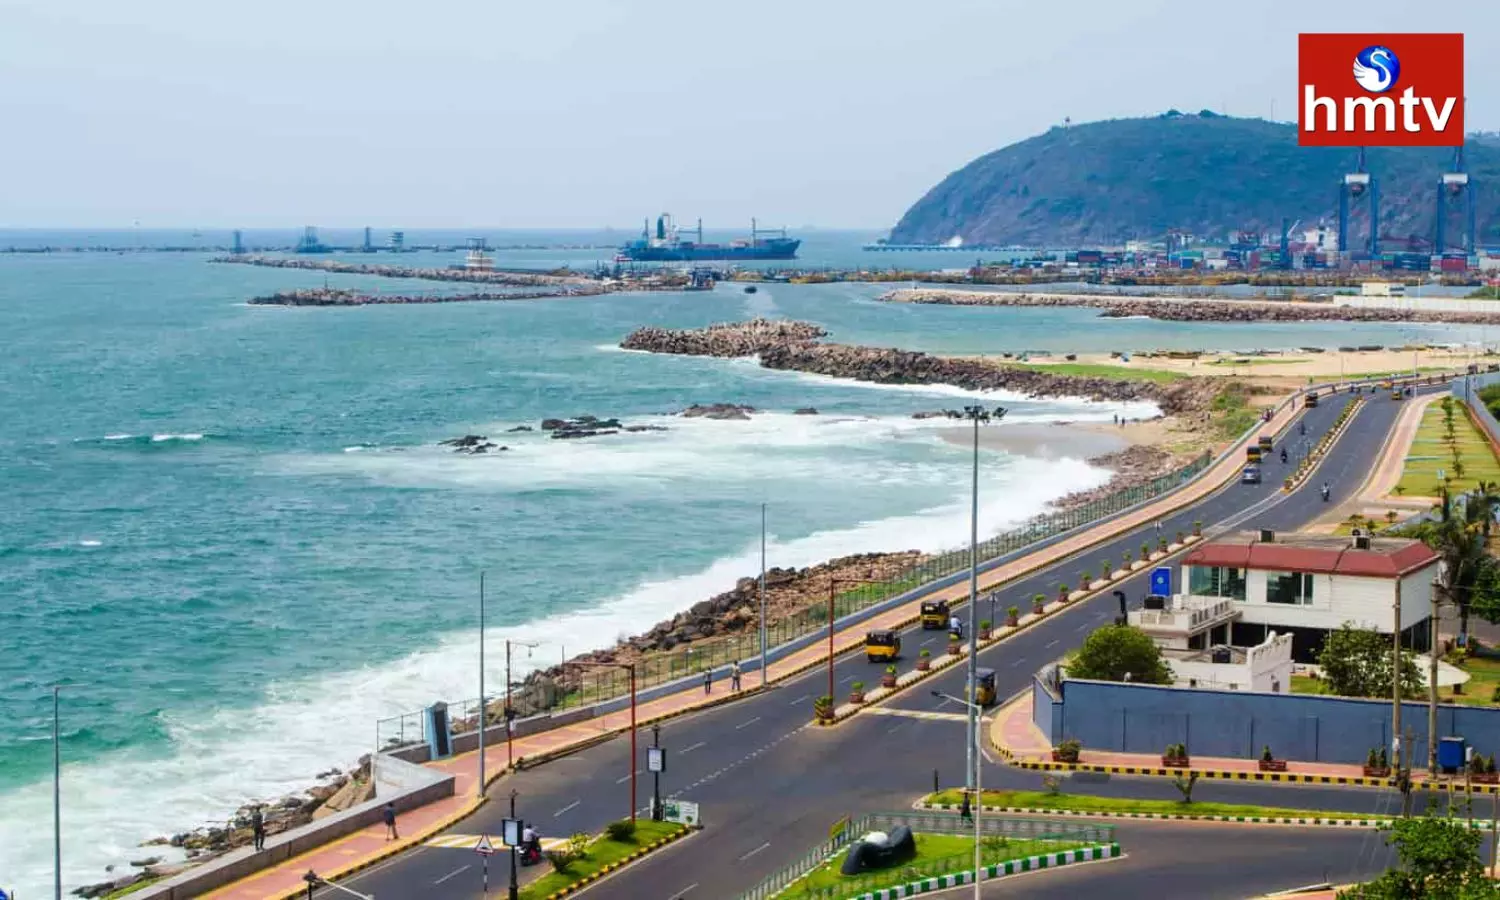 Vizag Is Getting Ready For International Celebrations